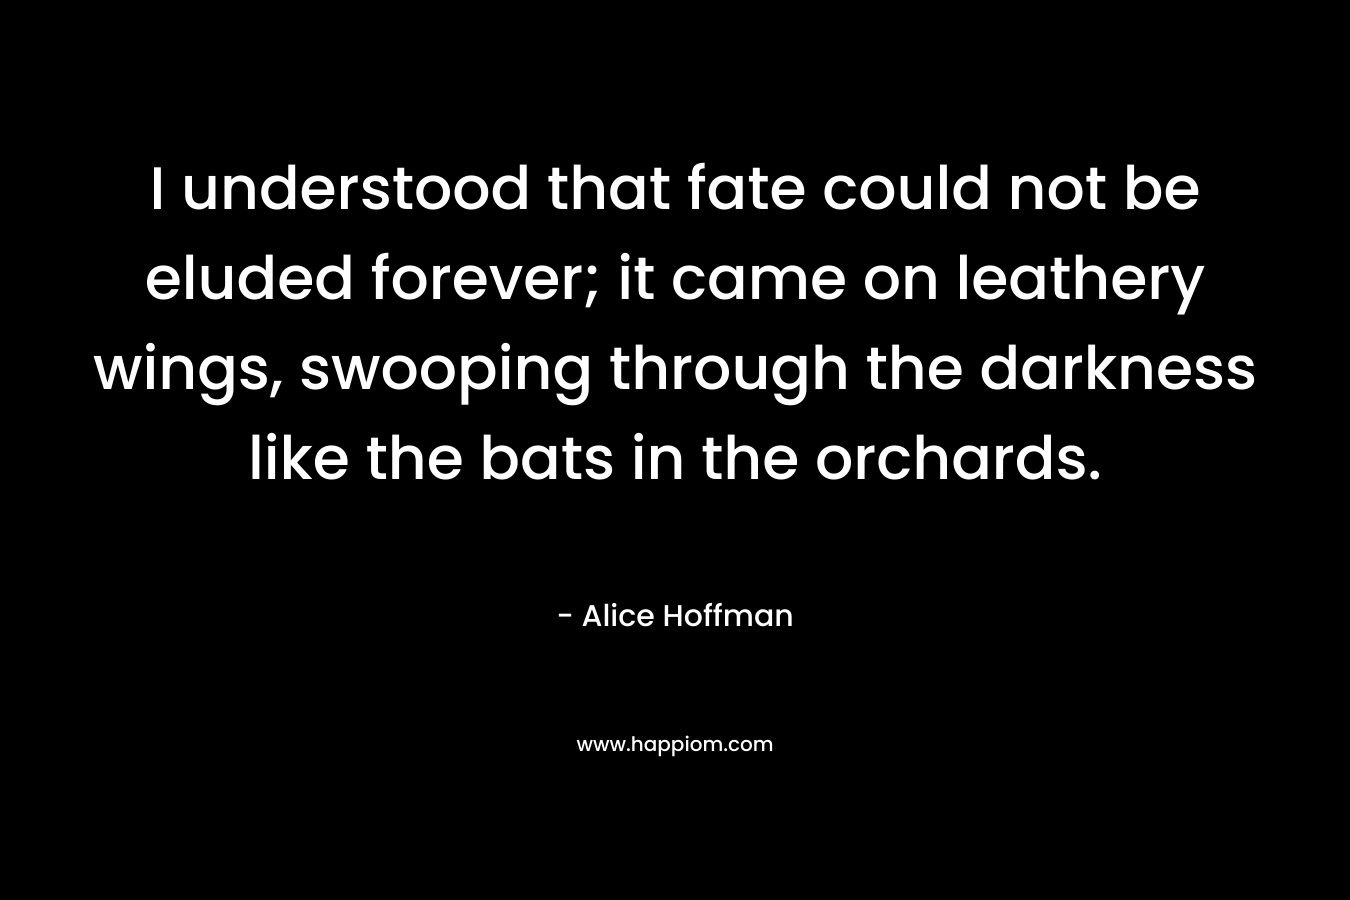 I understood that fate could not be eluded forever; it came on leathery wings, swooping through the darkness like the bats in the orchards. – Alice Hoffman